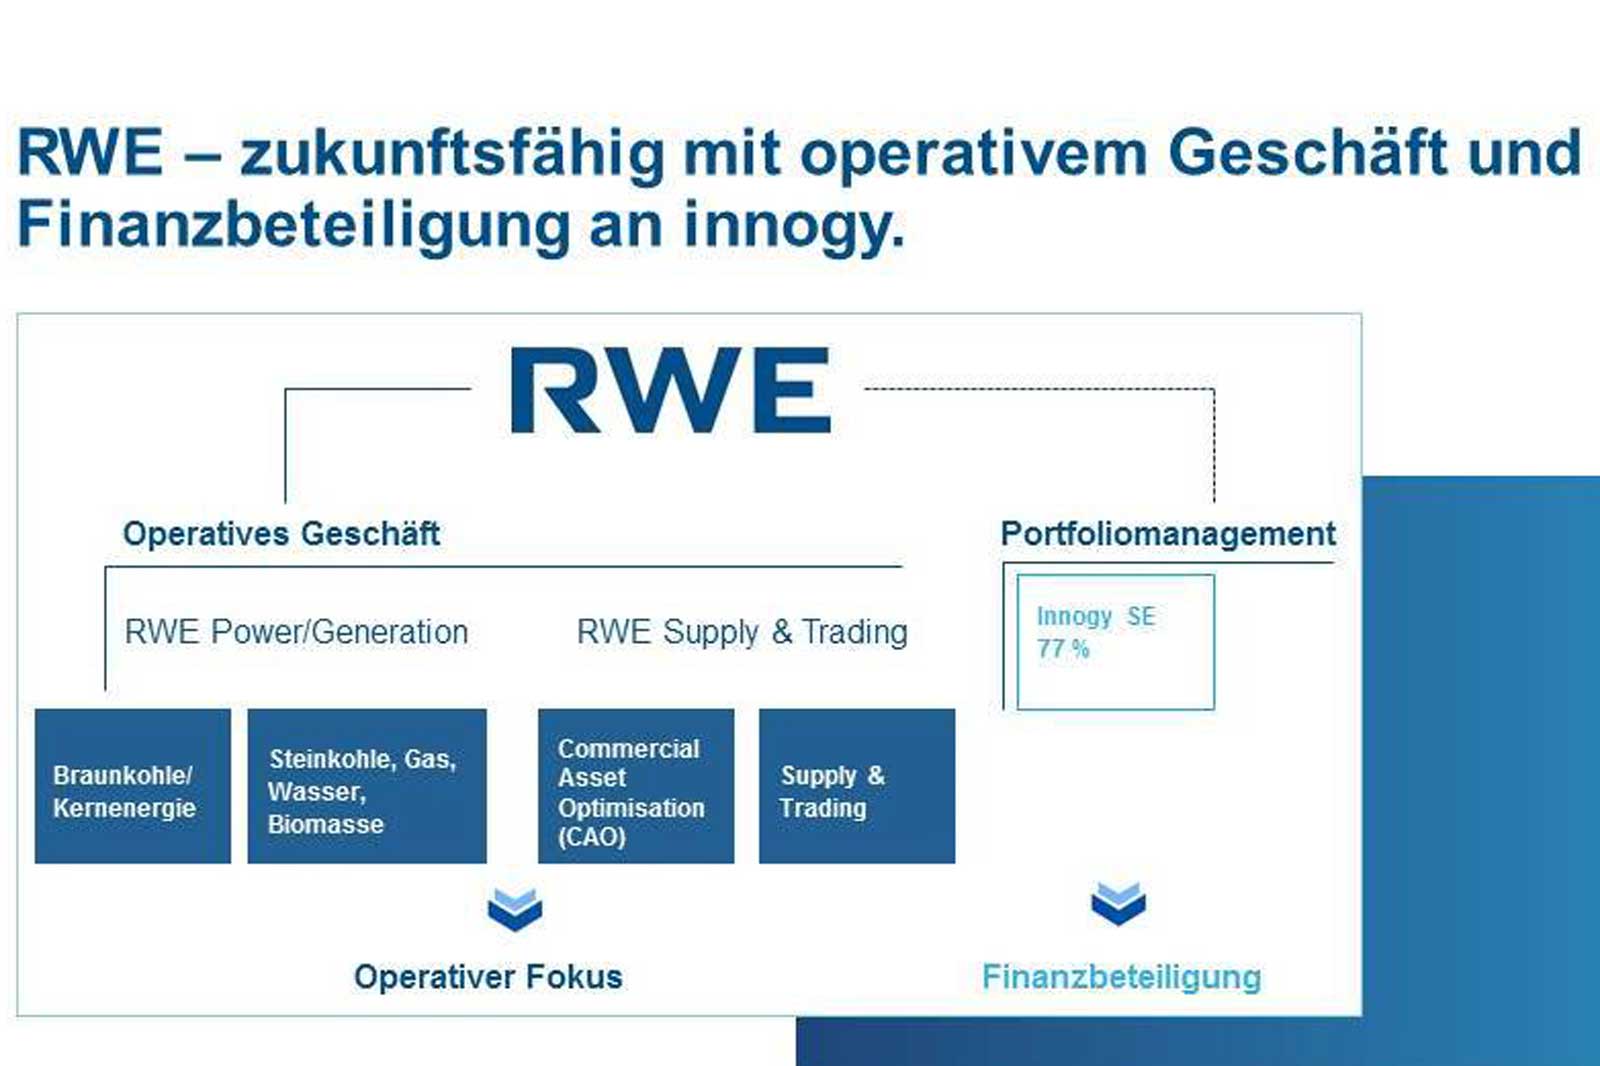 RWE business divisions and stake in innogy